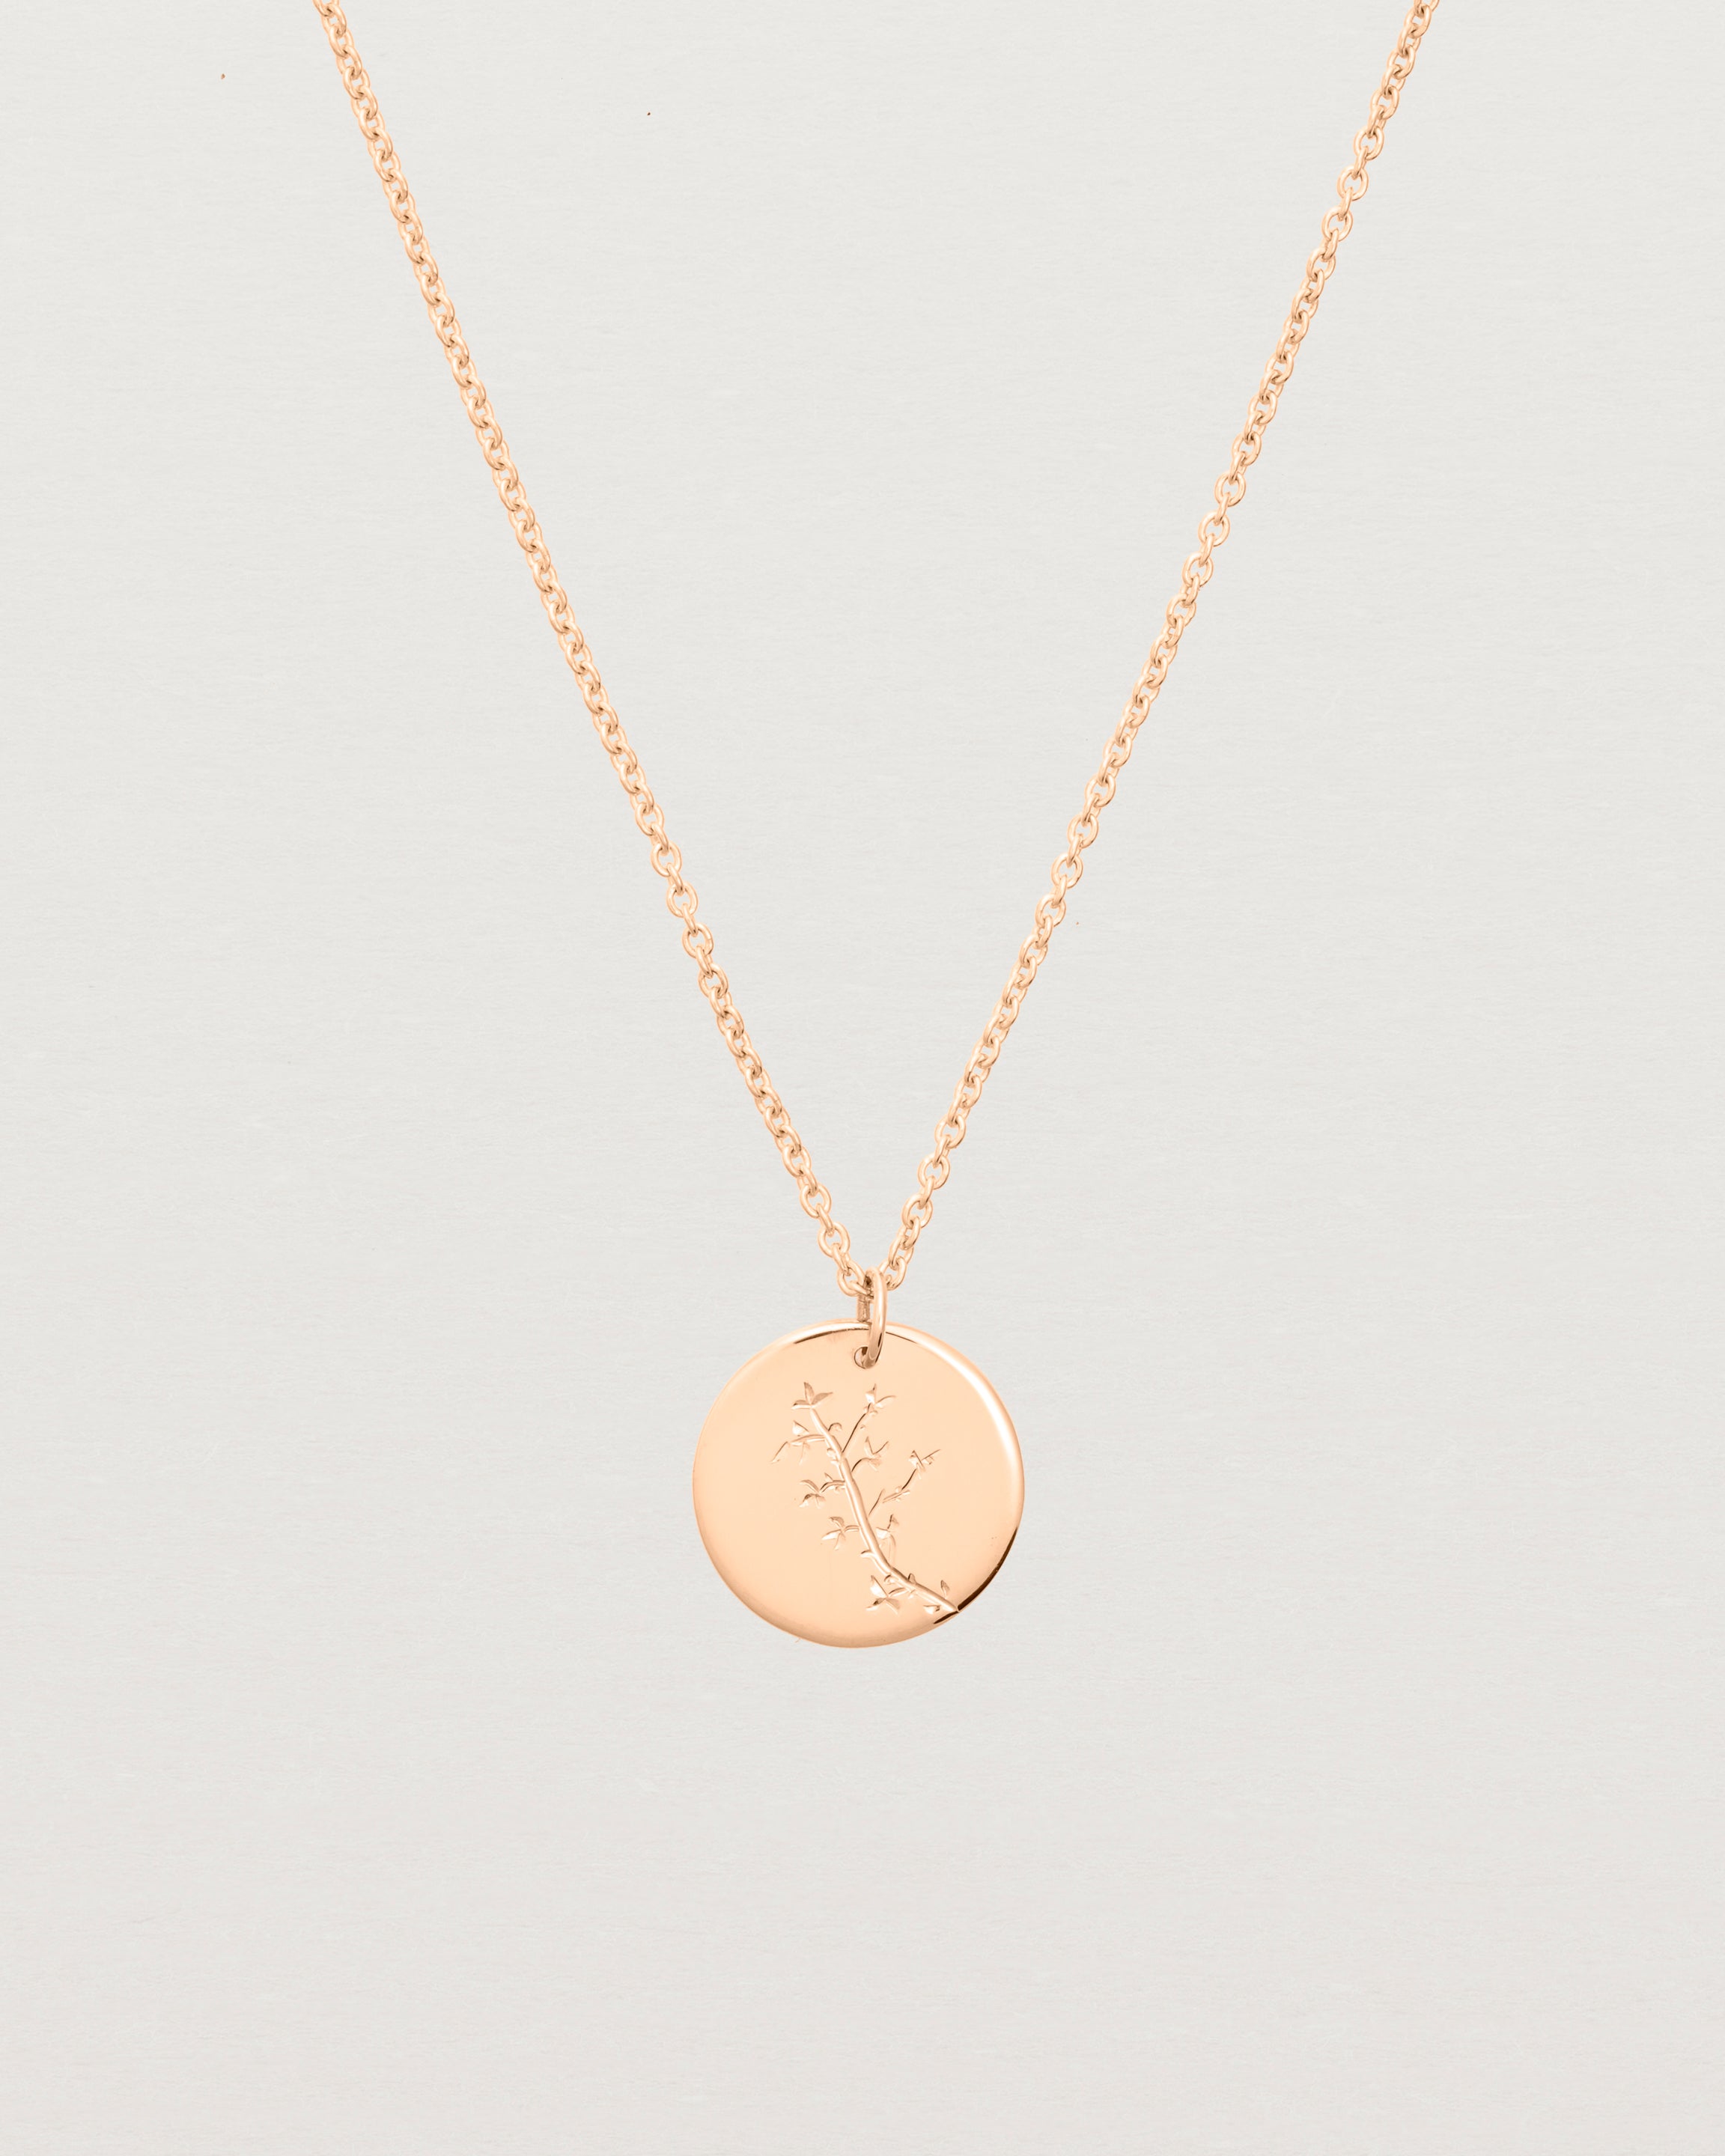 rose gold engraved necklace with a botanical vine engraving